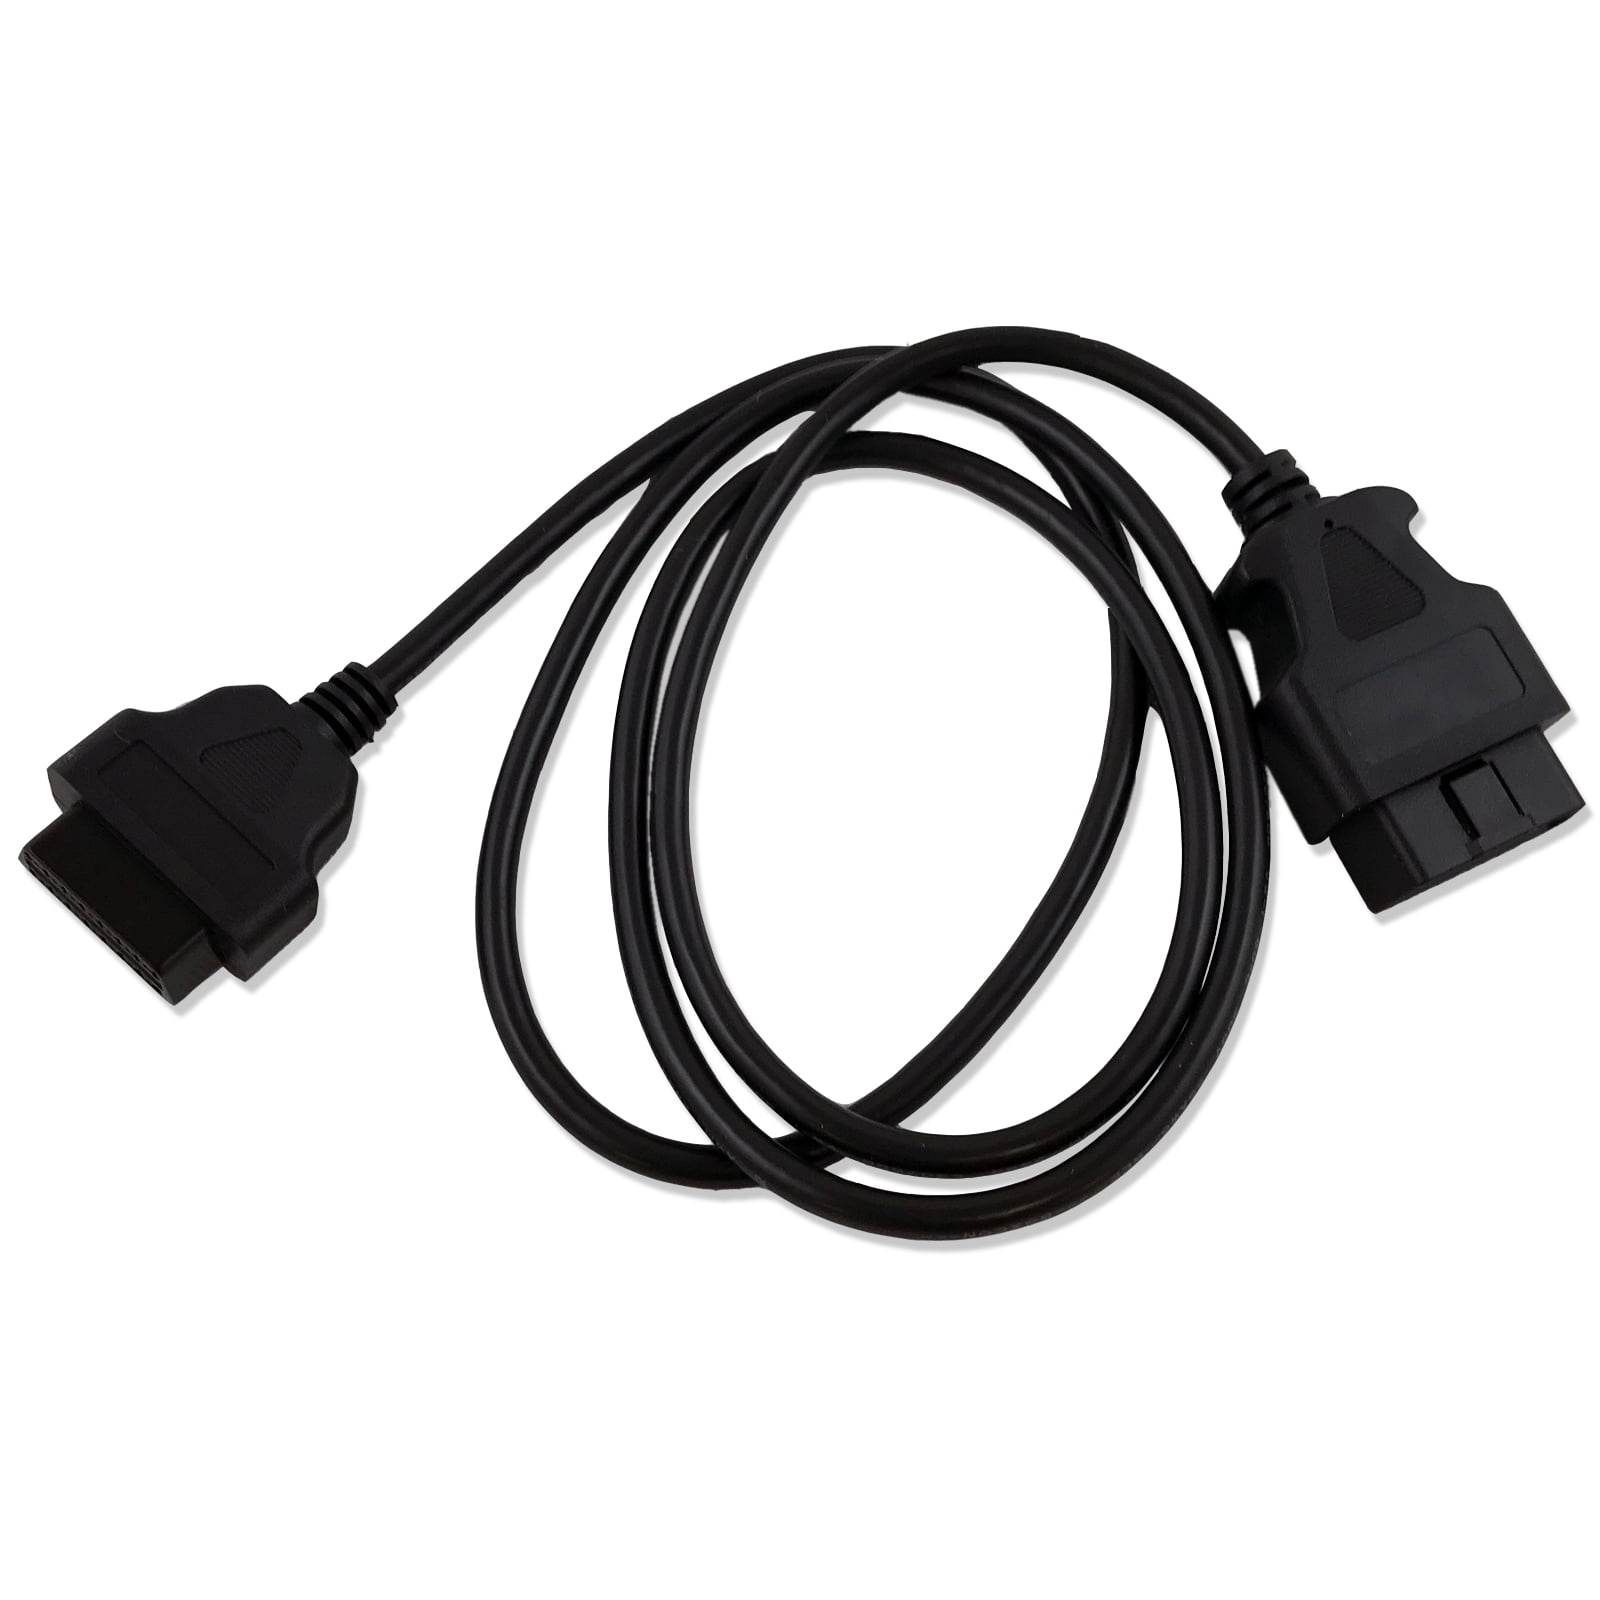 1m OBD2 OBDII Extension Cable 16Pin Male To Female Diagnostic Connector Adapter 